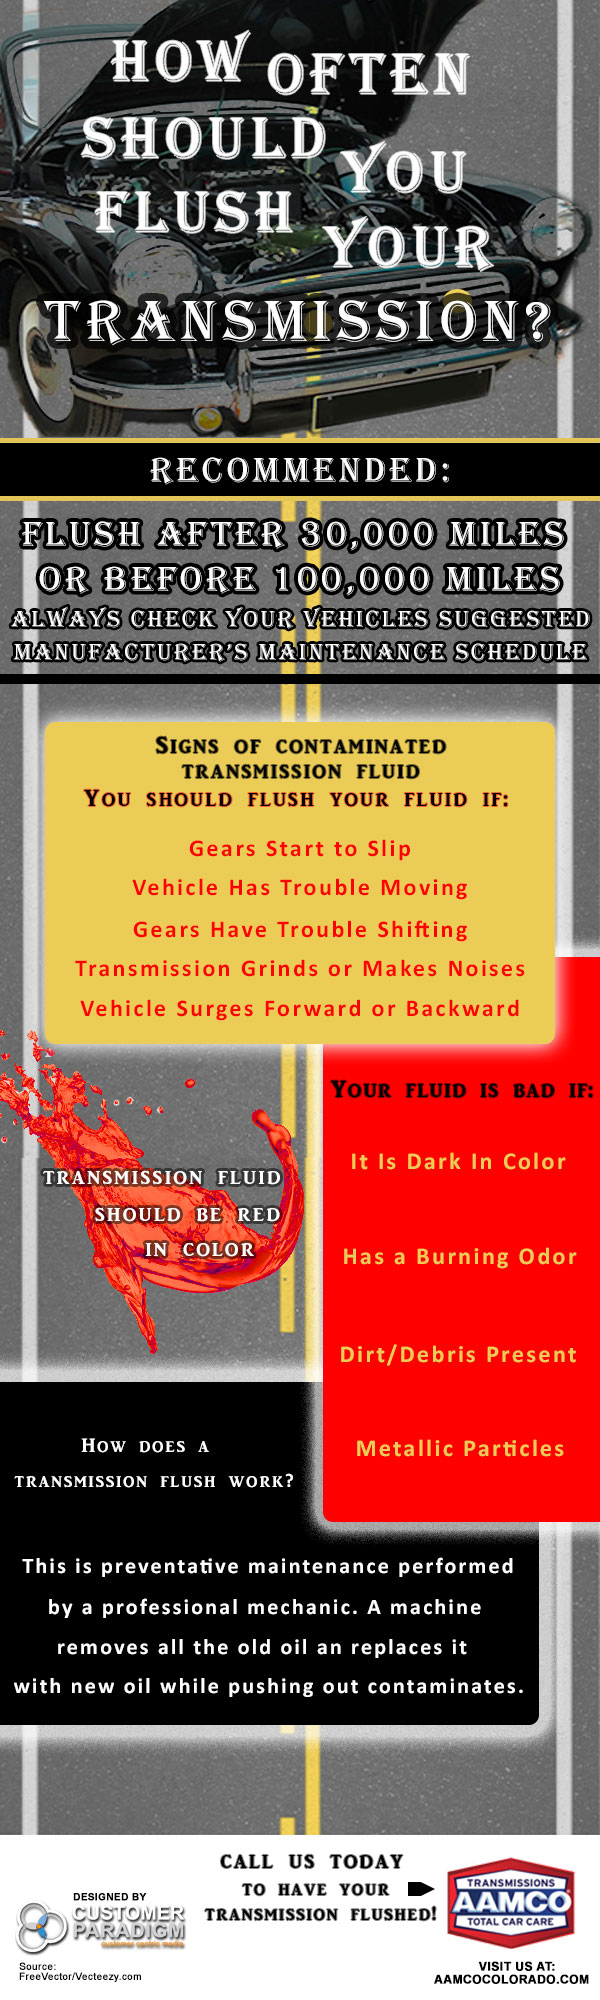 How To Flush Your Transmission Should You Flush Your Transmission? | AAMCO Colorado